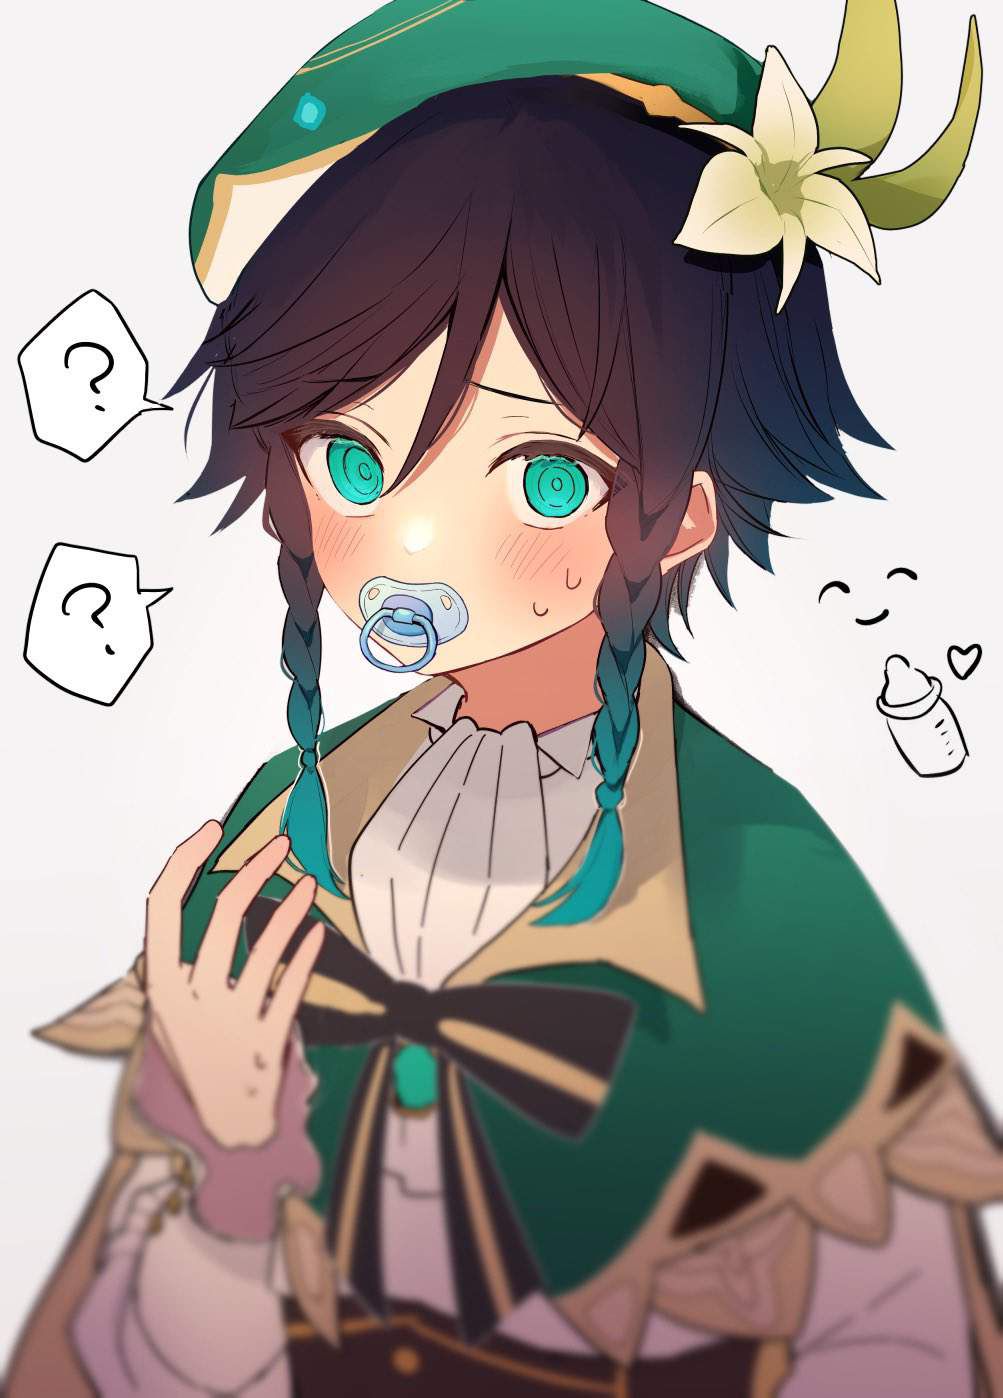 【Ekechan】Secondary erotic image of a girl sucking on a pacifier 13